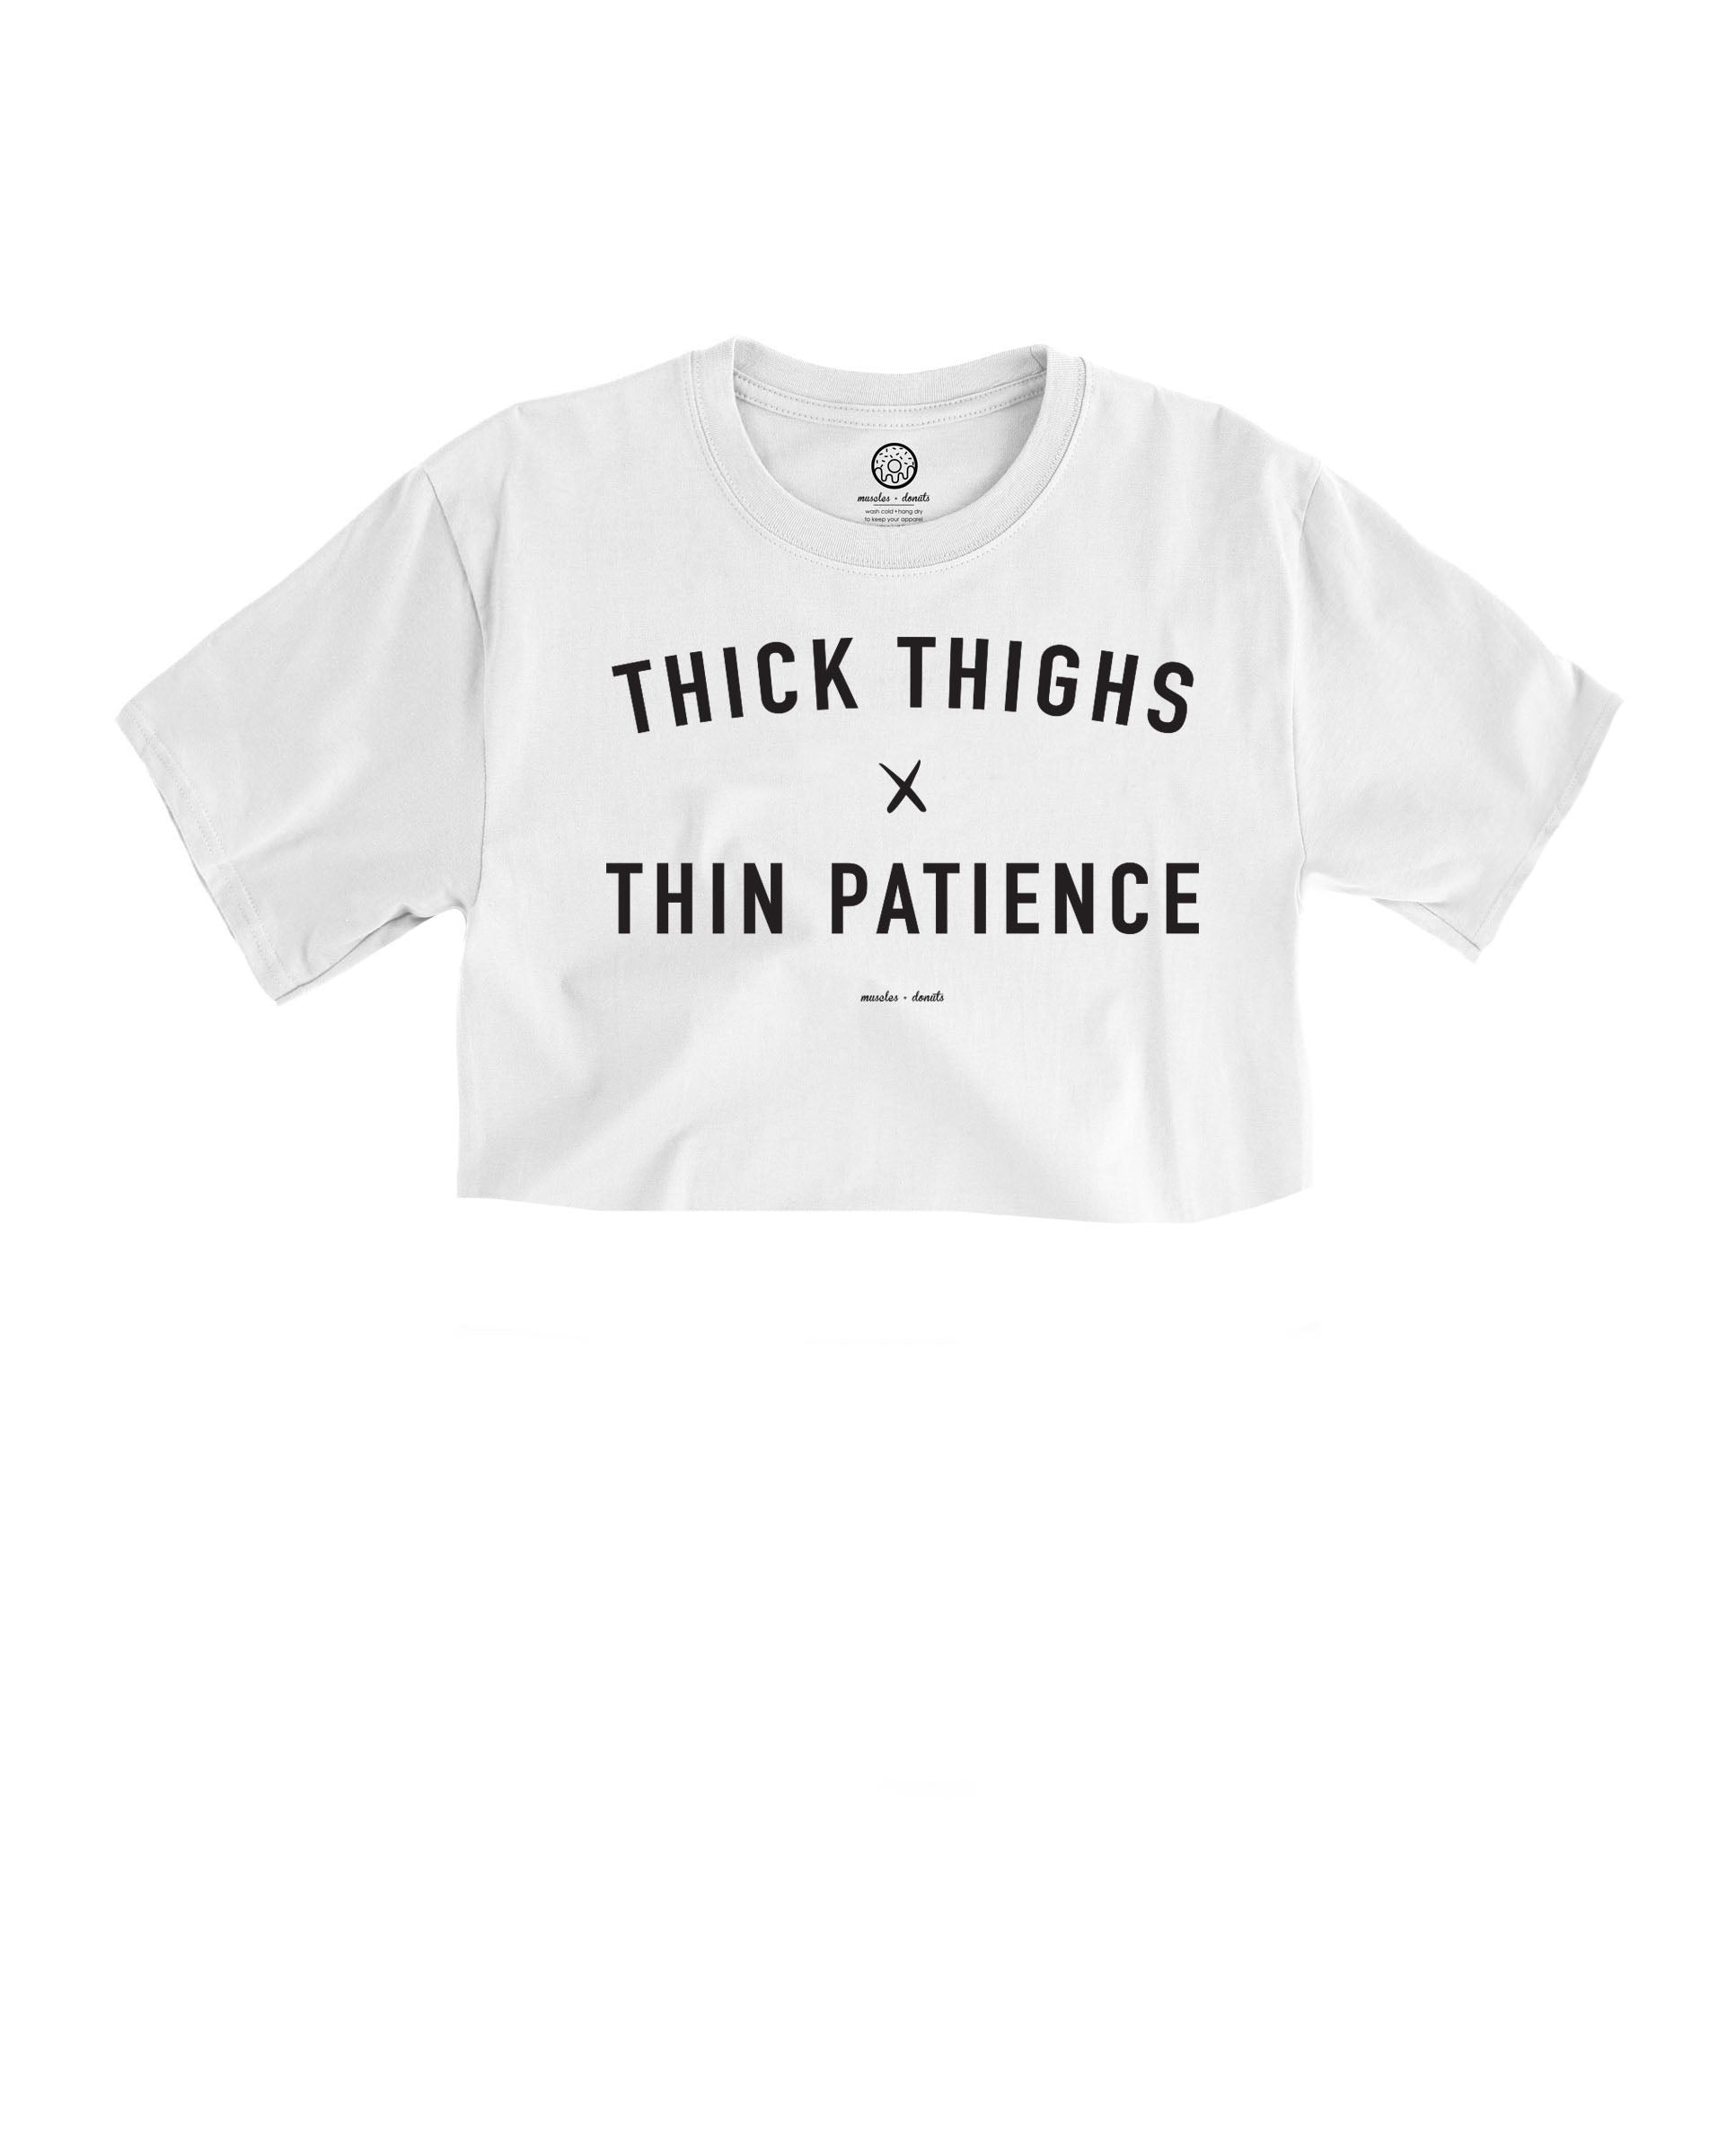 Thick Thighs Thin Patience T-shirt, Thick Thighs T-shirt, Thick